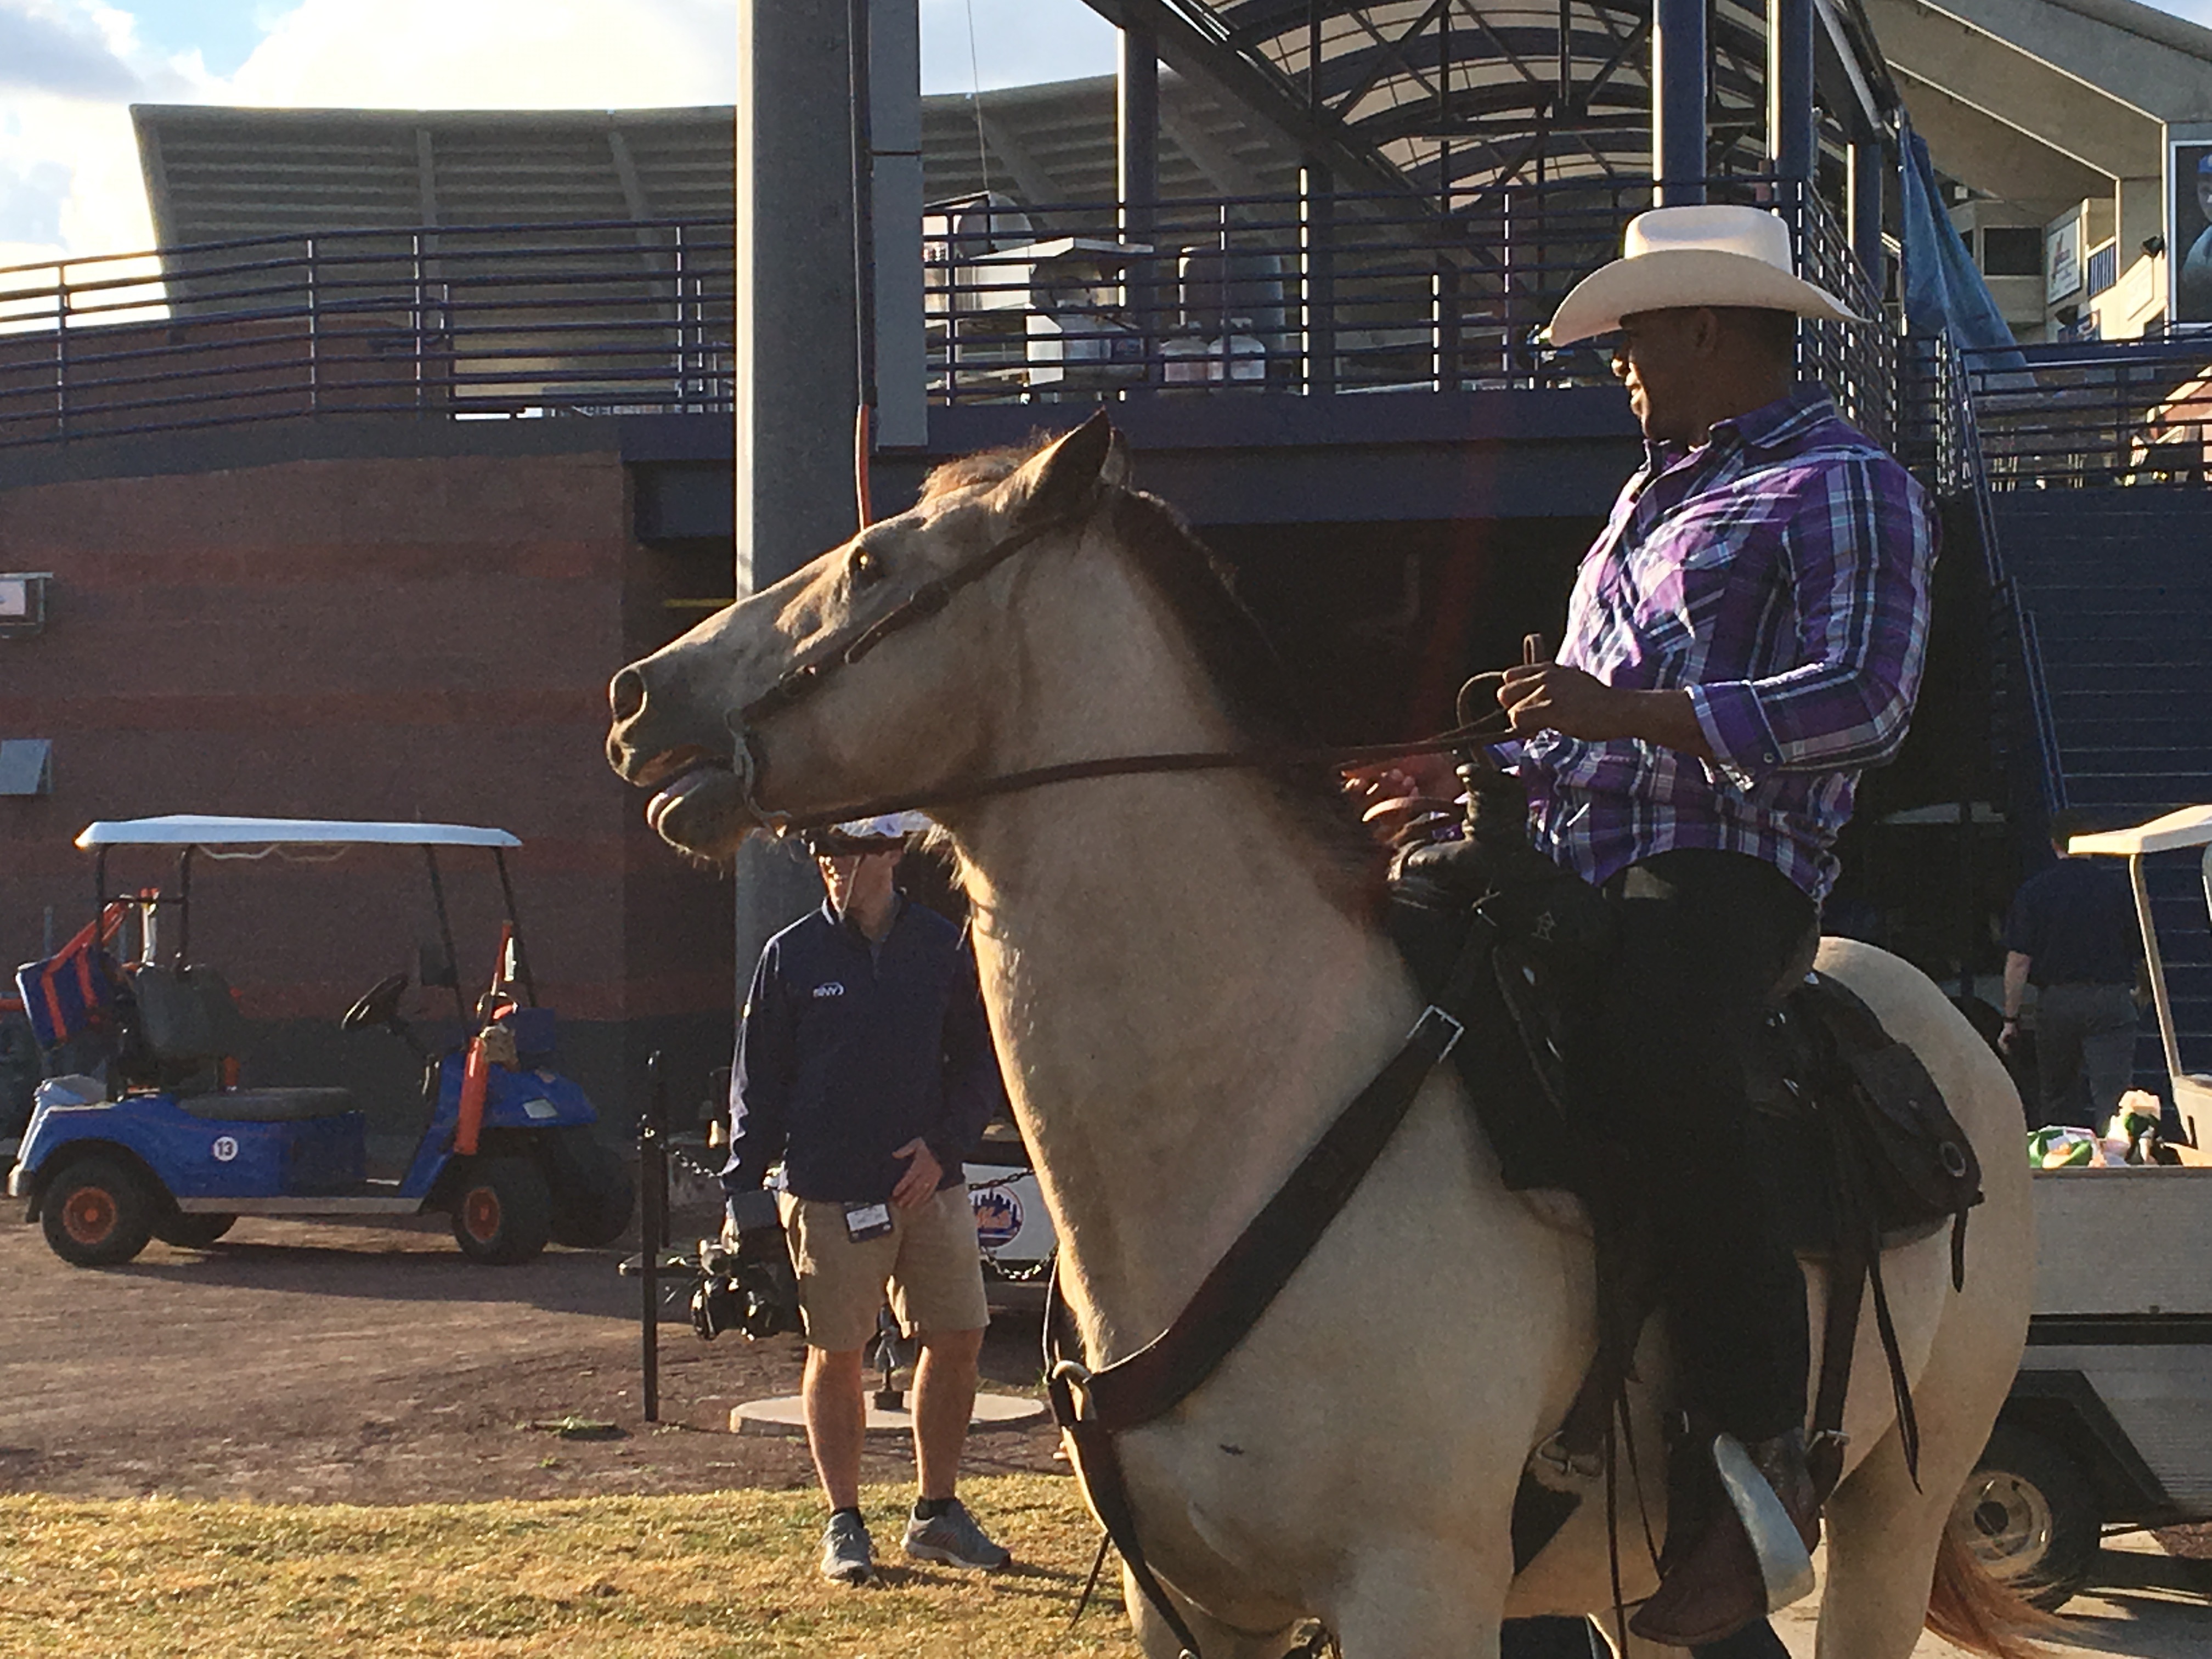 Yoenis Cespedes Rides a Horse to Mets Camp - WSJ